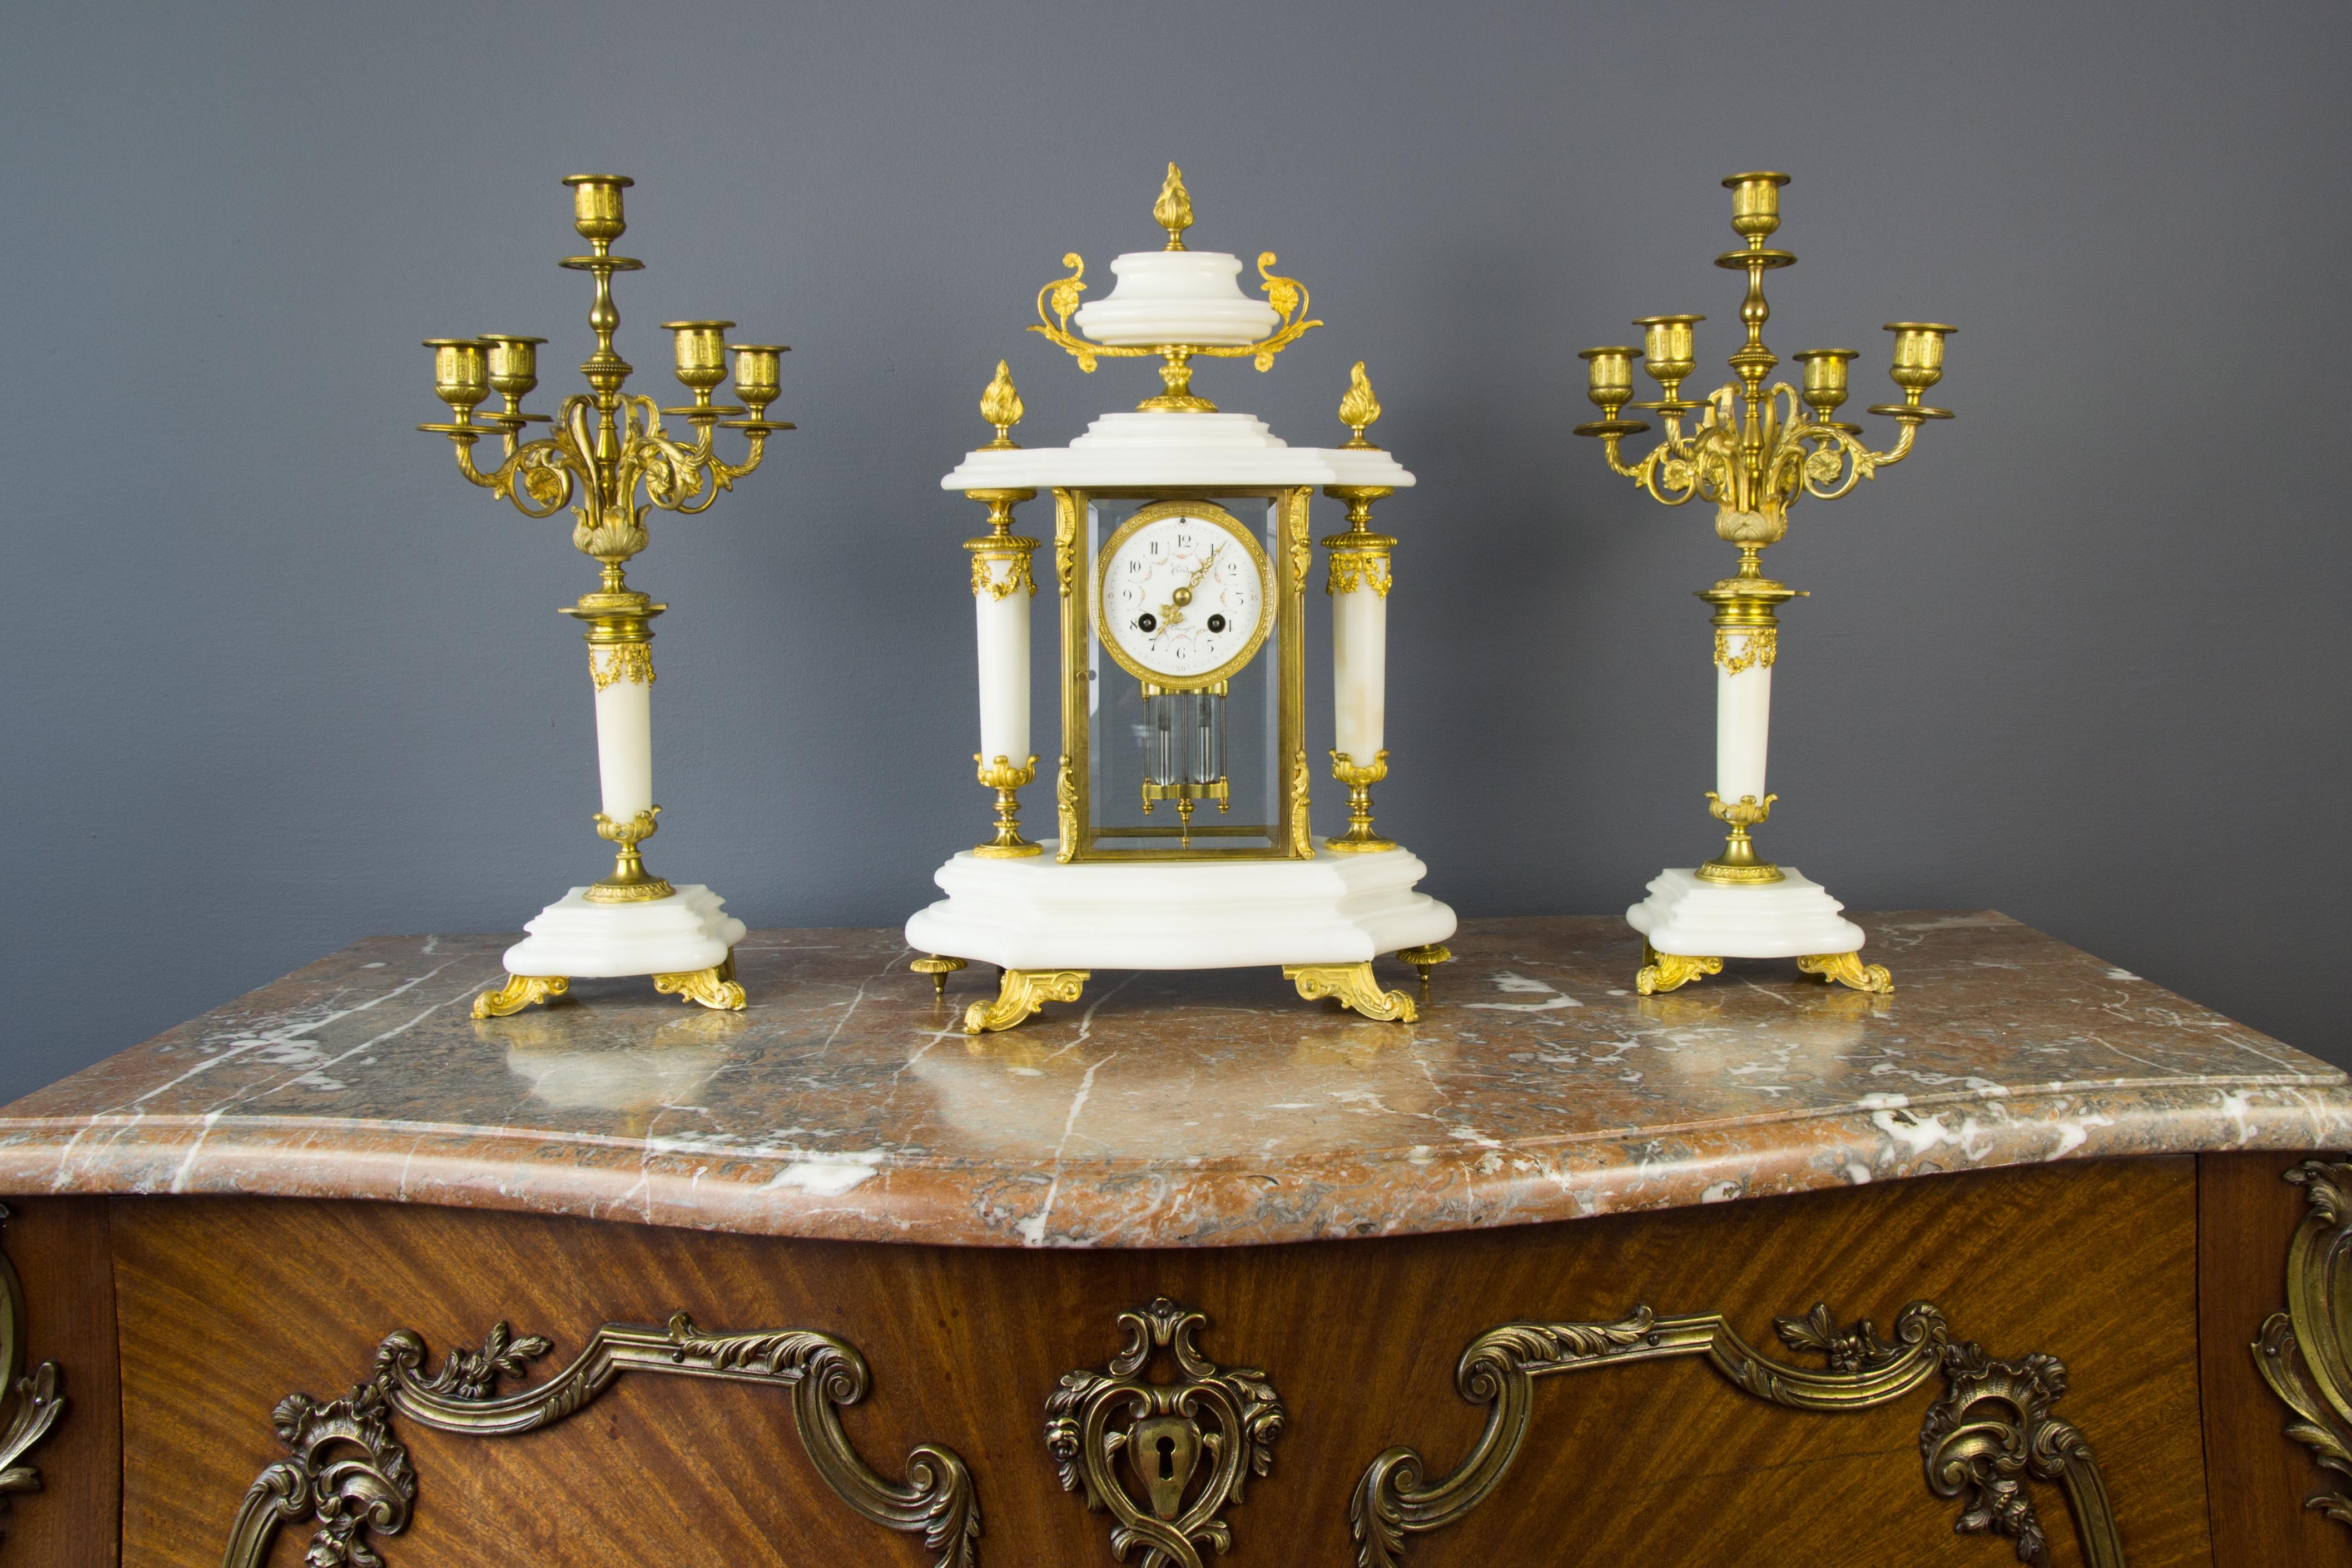 An antique 19th century French beautiful and well running white marble and gilt bronze mantel clock garniture set by A.D.Mougin. The marble is wonderfully sculptured in lovely curved detail.
Floral decorated porcelain dial with Limoges name on it, a